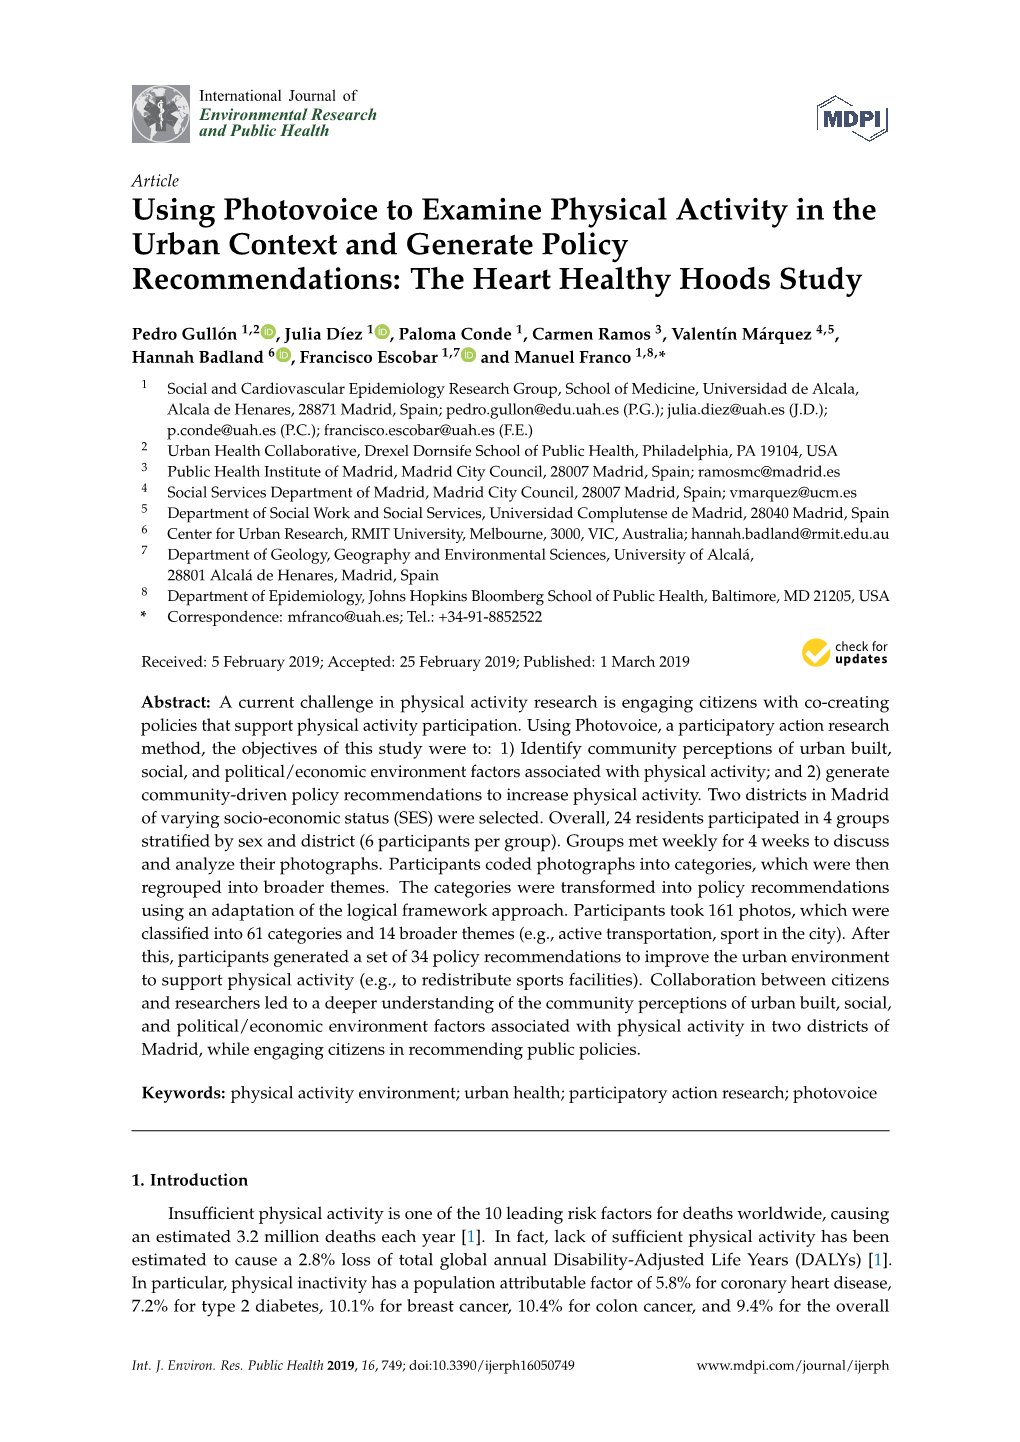 Using Photovoice to Examine Physical Activity in the Urban Context and Generate Policy Recommendations: the Heart Healthy Hoods Study